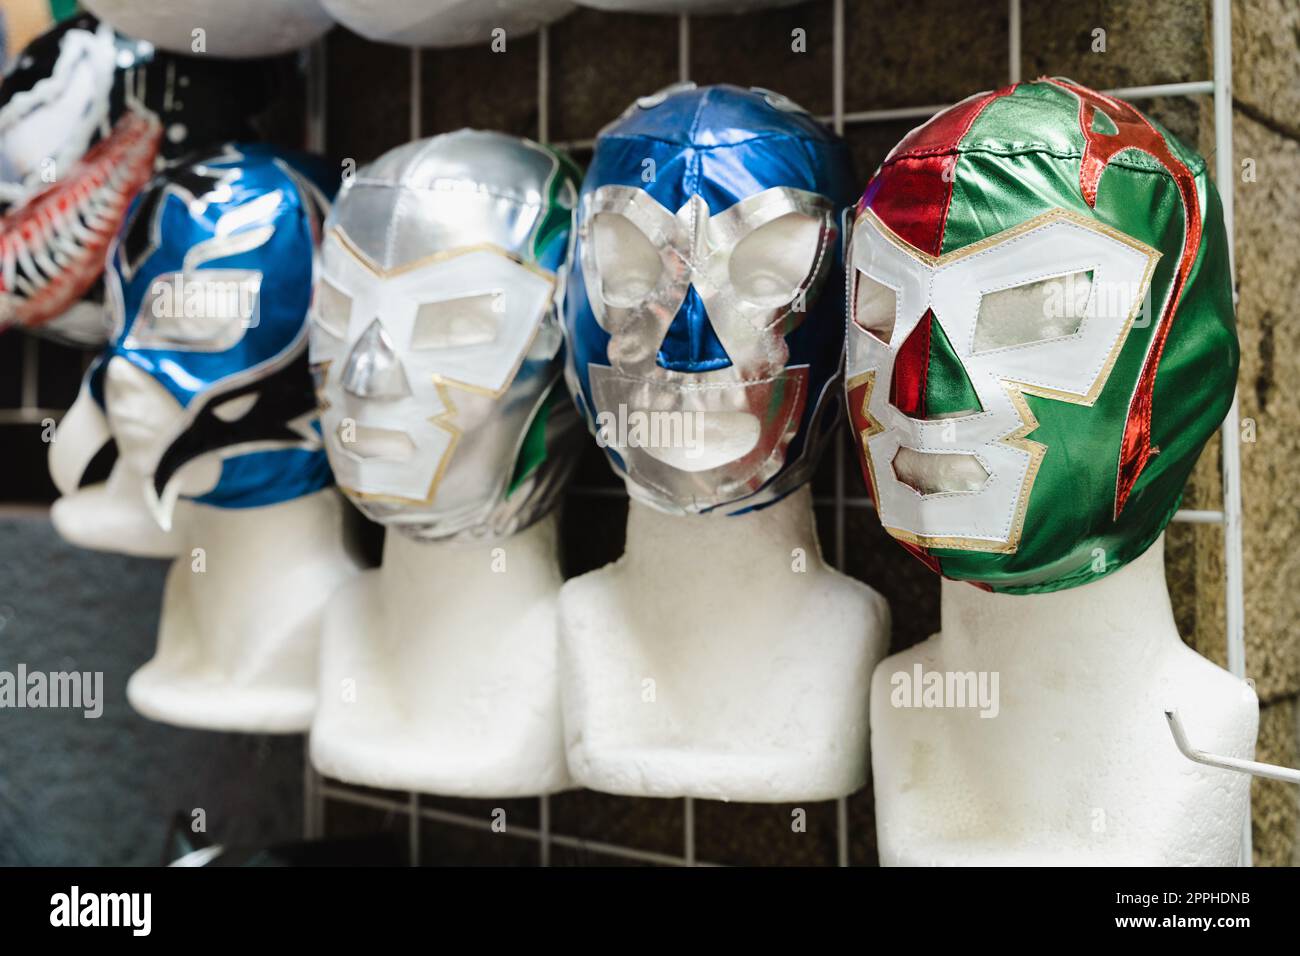 Mexican wrestling masks on mannequin heads Stock Photo